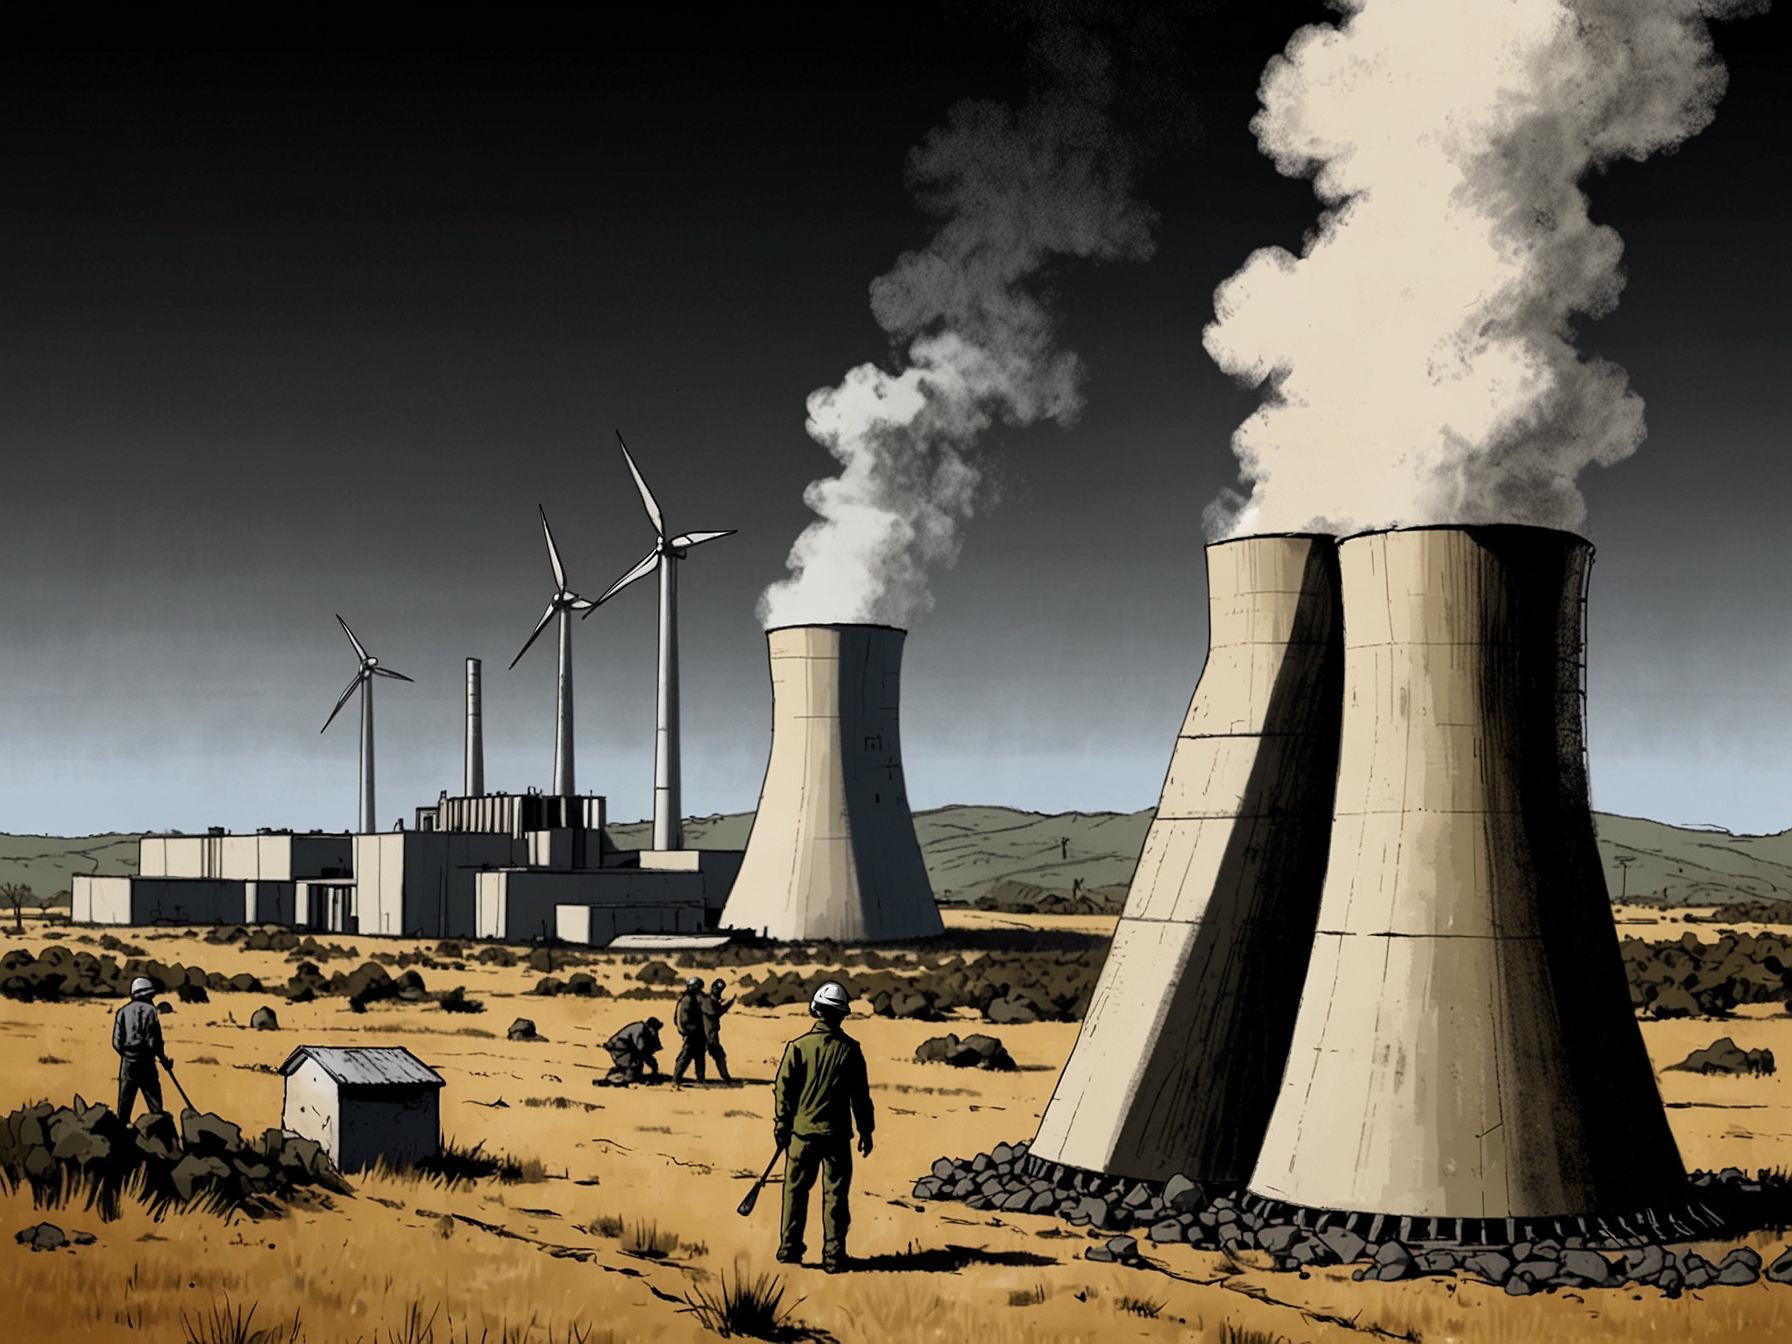 Graphic contrasting the Coalition's nuclear policy with Labor's renewable energy stance, highlighting the broader strategic and ideological divides in Australia's political landscape.